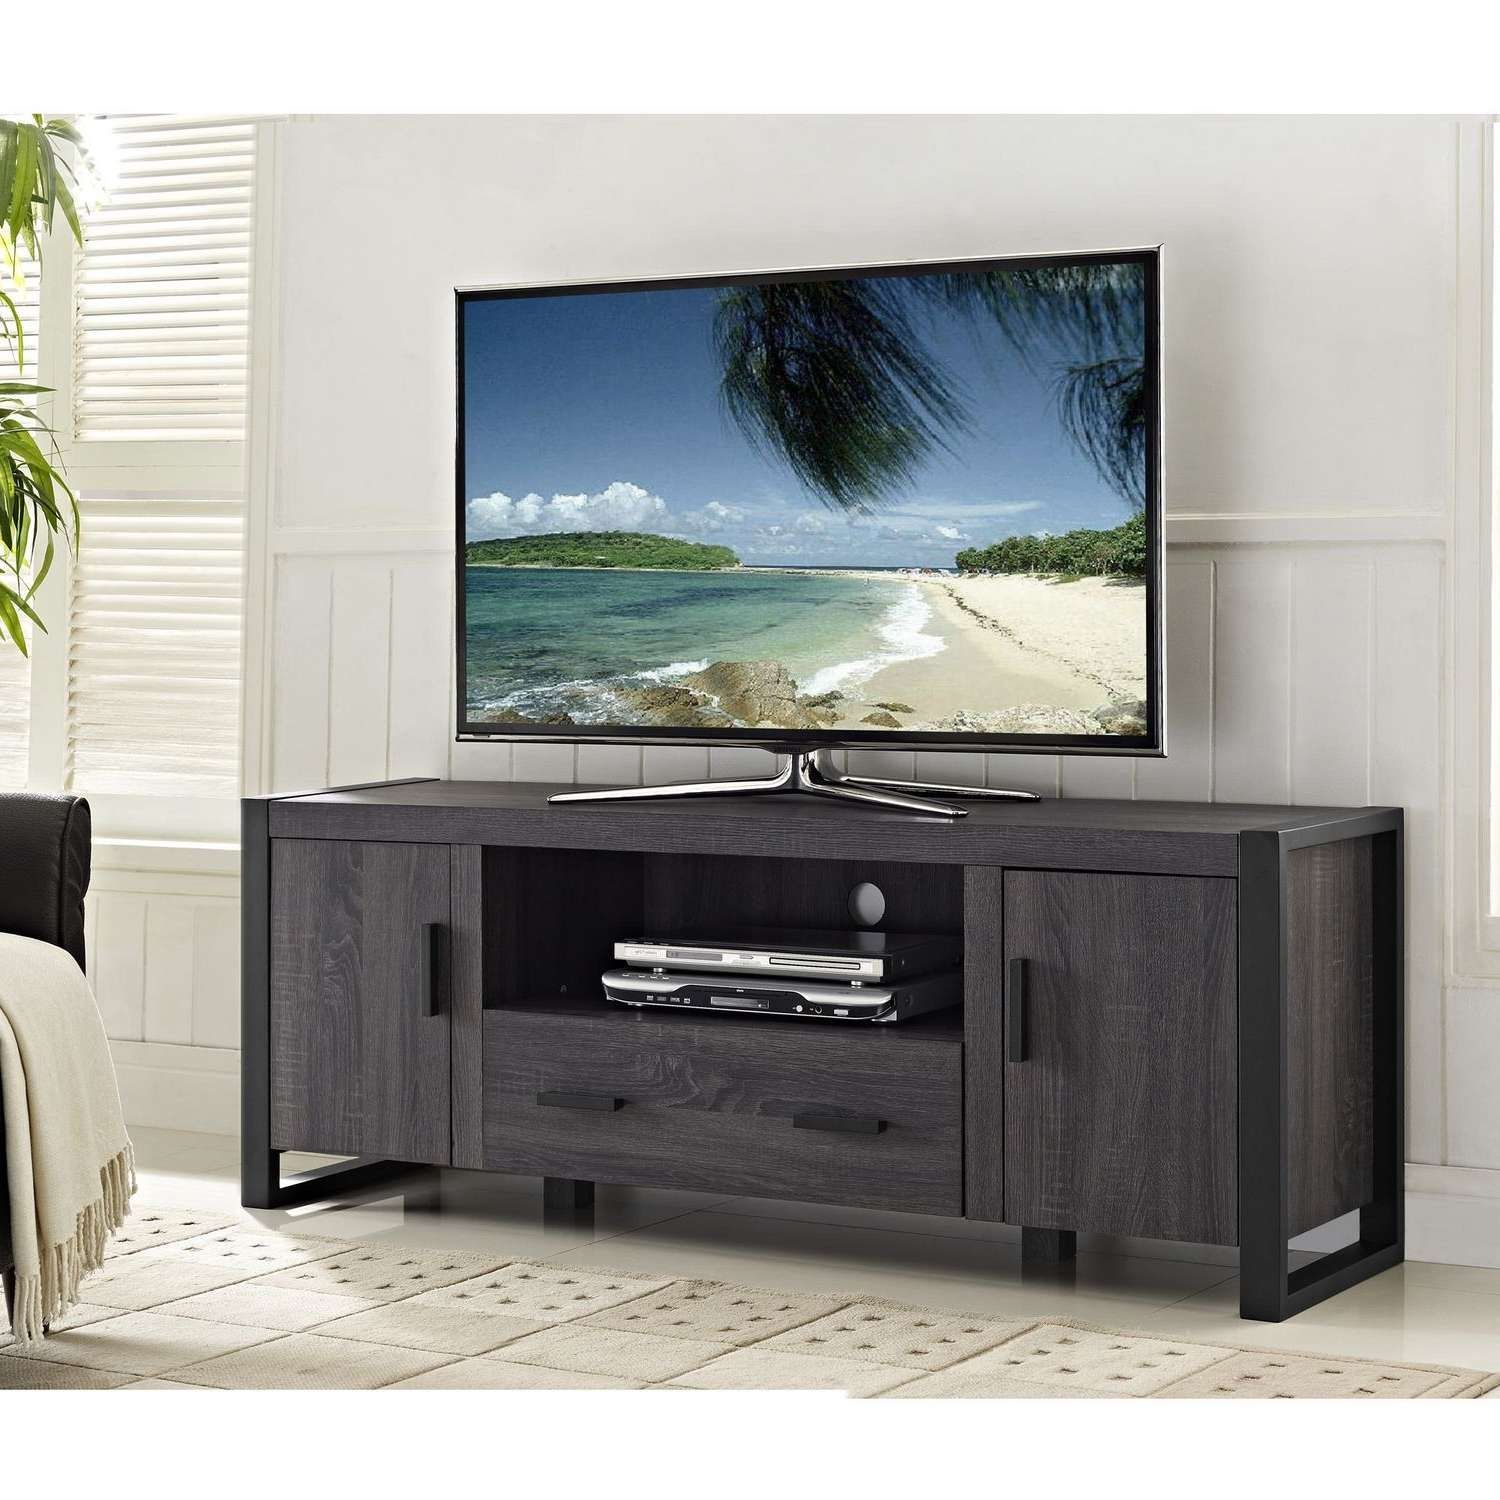 We Furniture 60" Grey Wood Tv Stand Console | Walmart Canada Inside Wooden Tv Stands (View 15 of 15)